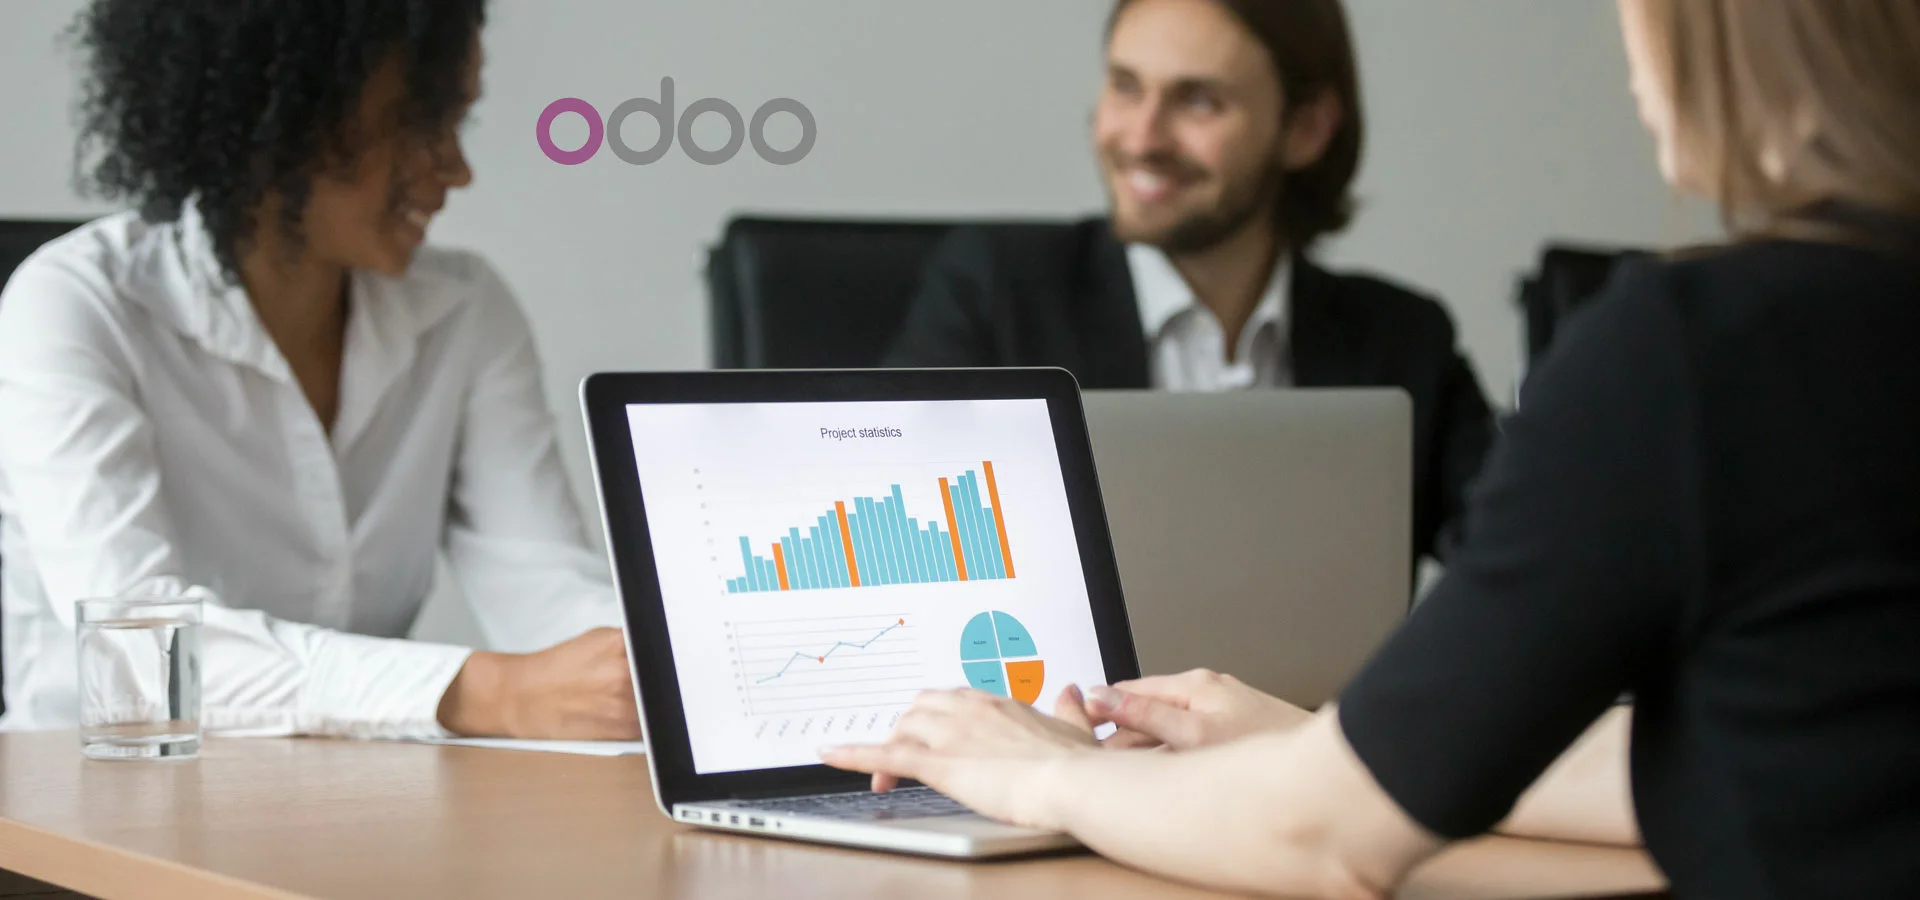 odoo-erp-support-and-services-related-blog-88